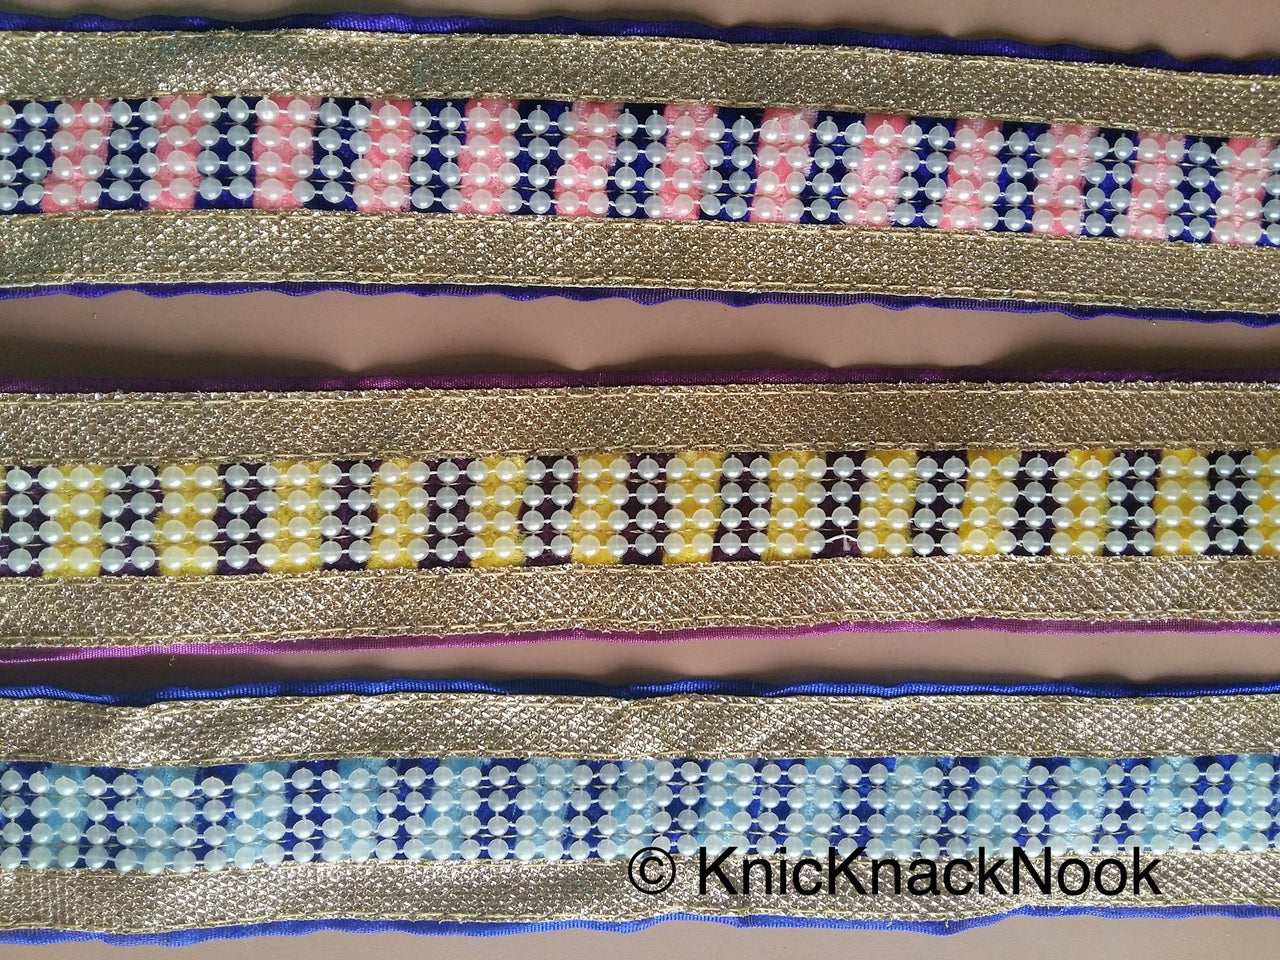 Velvet Fabric Trim, Pink And Silver Trim With FlatBack Beads Lattice, Approx. 50mm wide